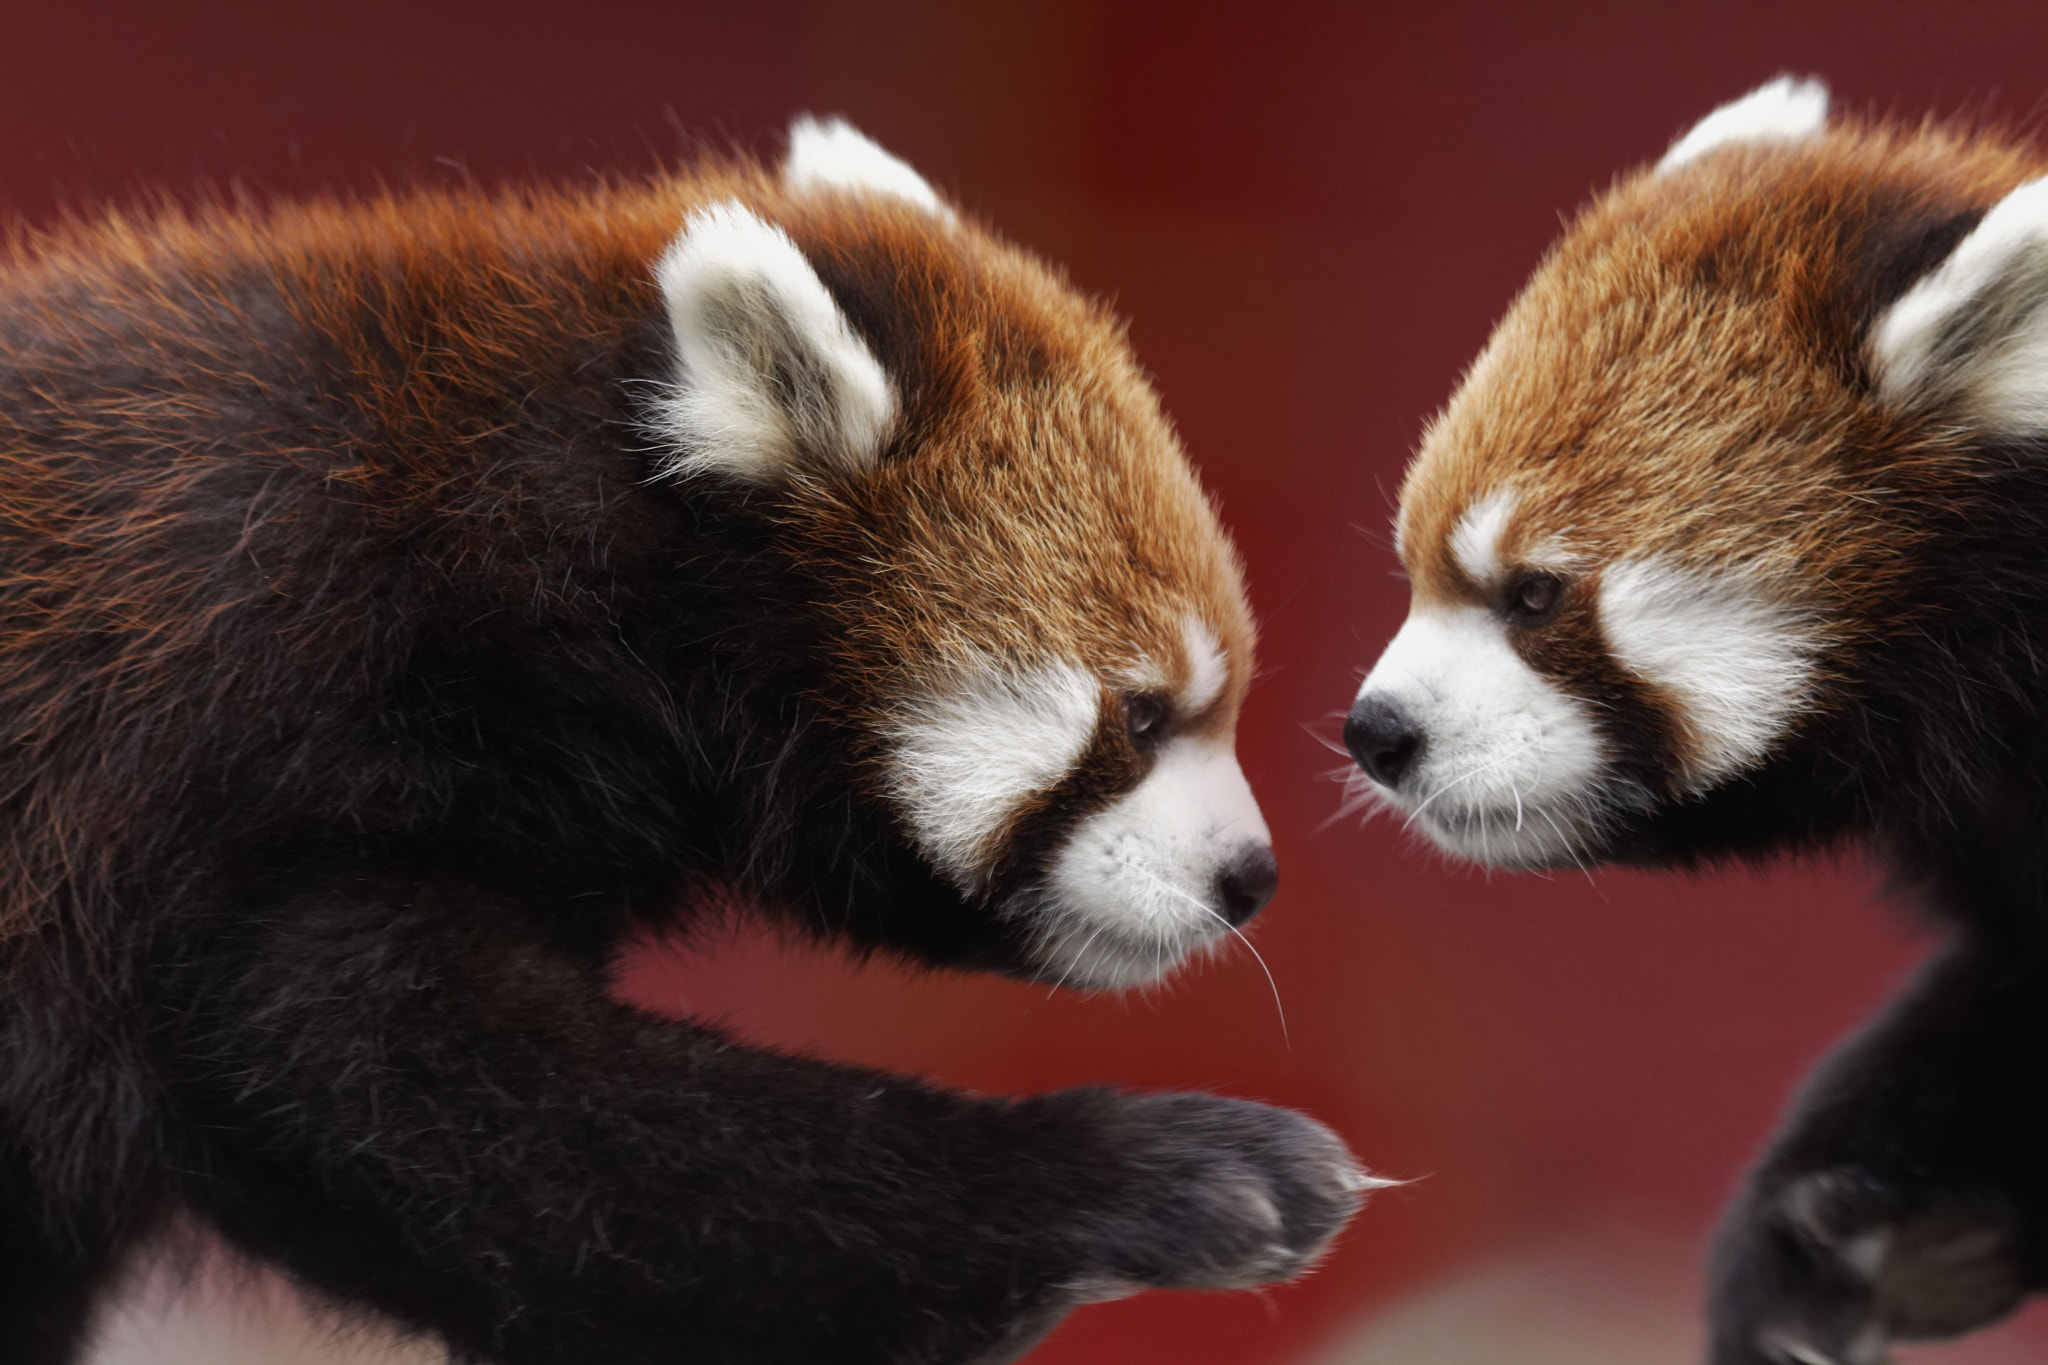 500px Photo ID: 71436611 Two Red Pandas On This Photography With The